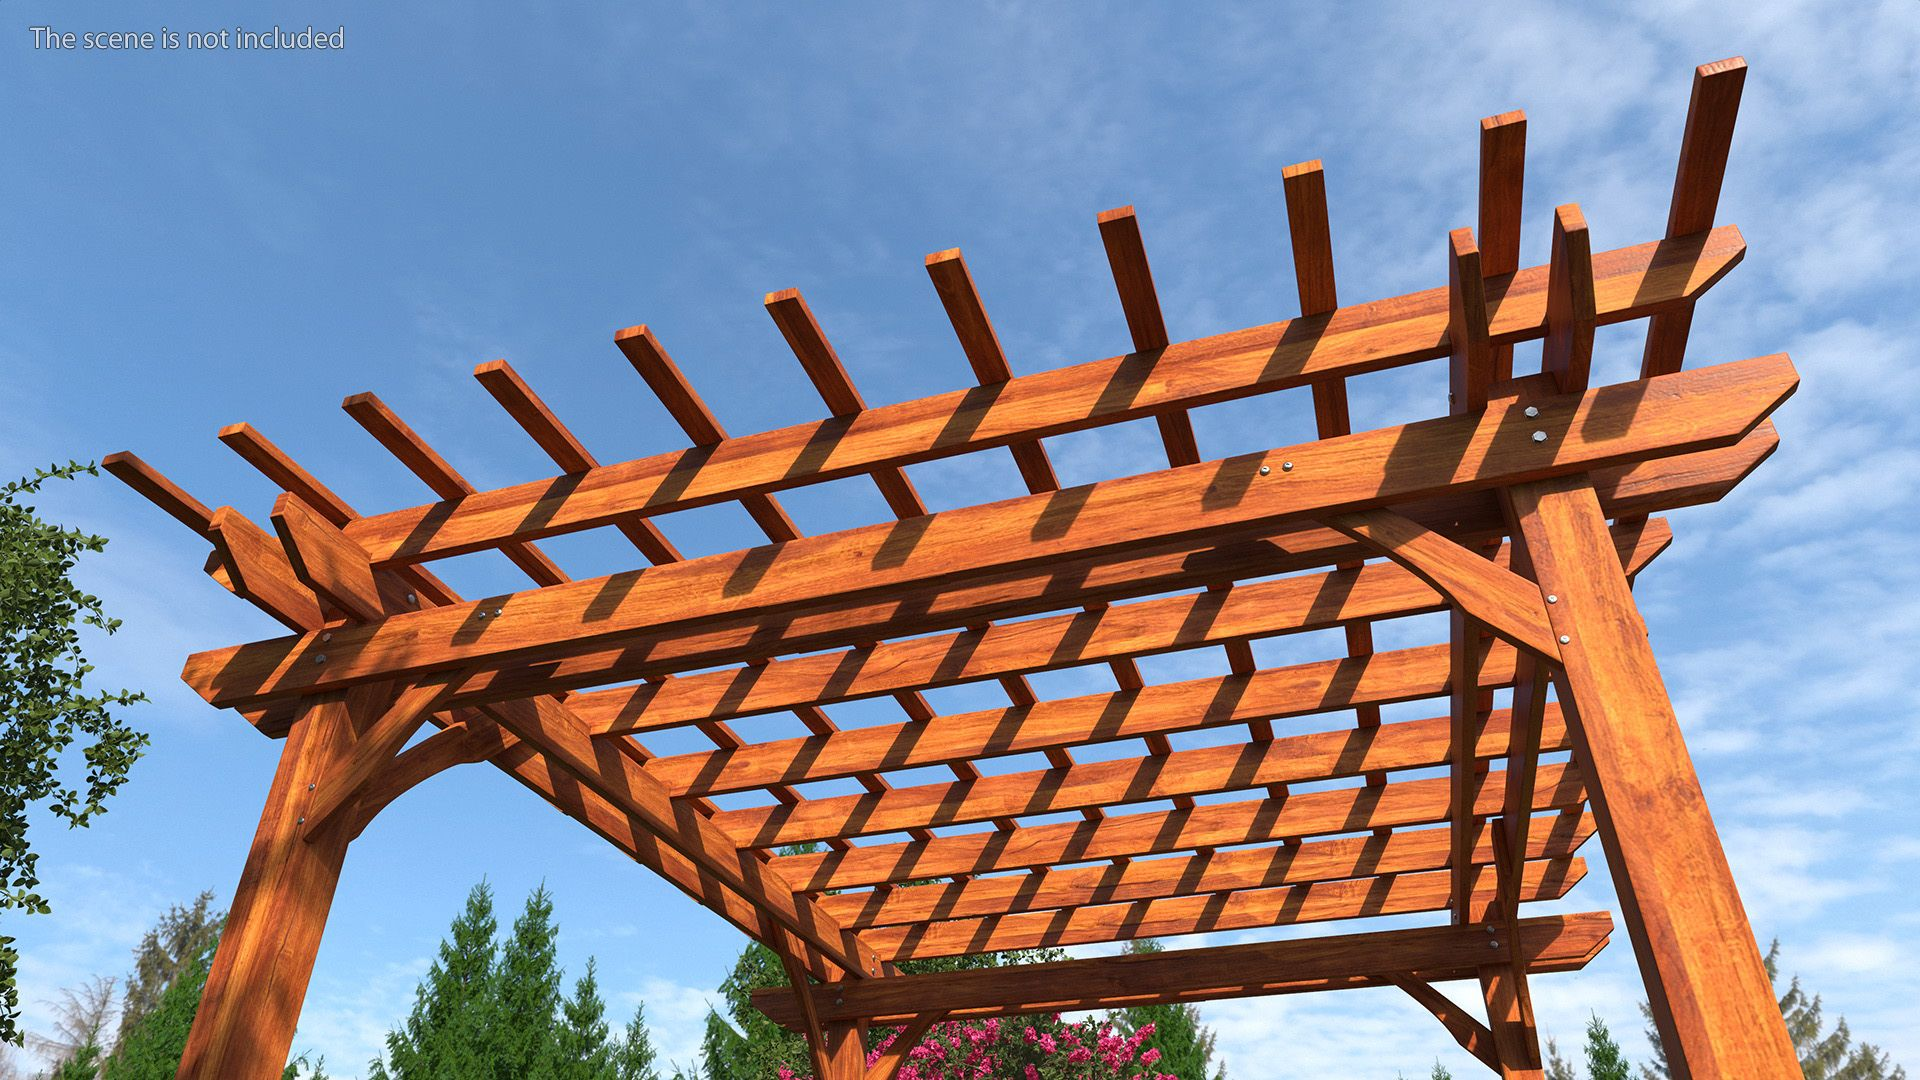 showing different styles of pergolas with slats helping block sun